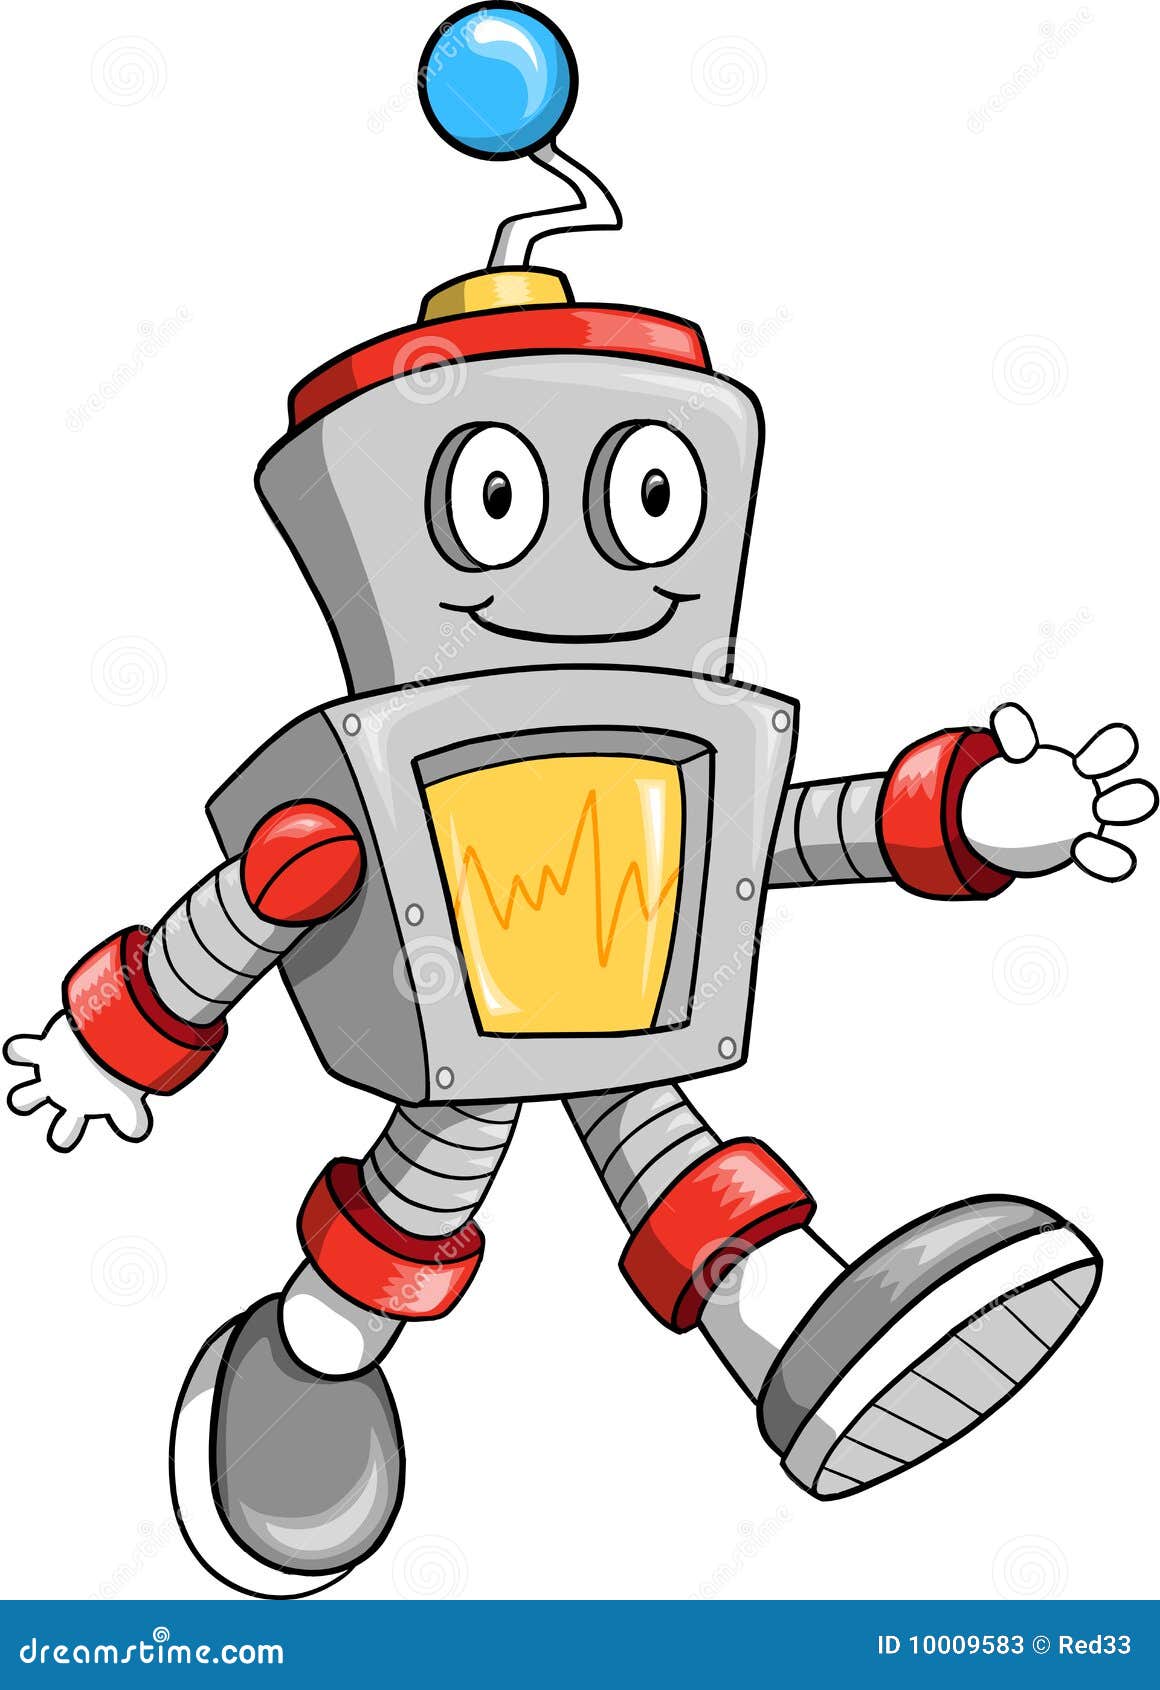 robot toy clipart - photo #30